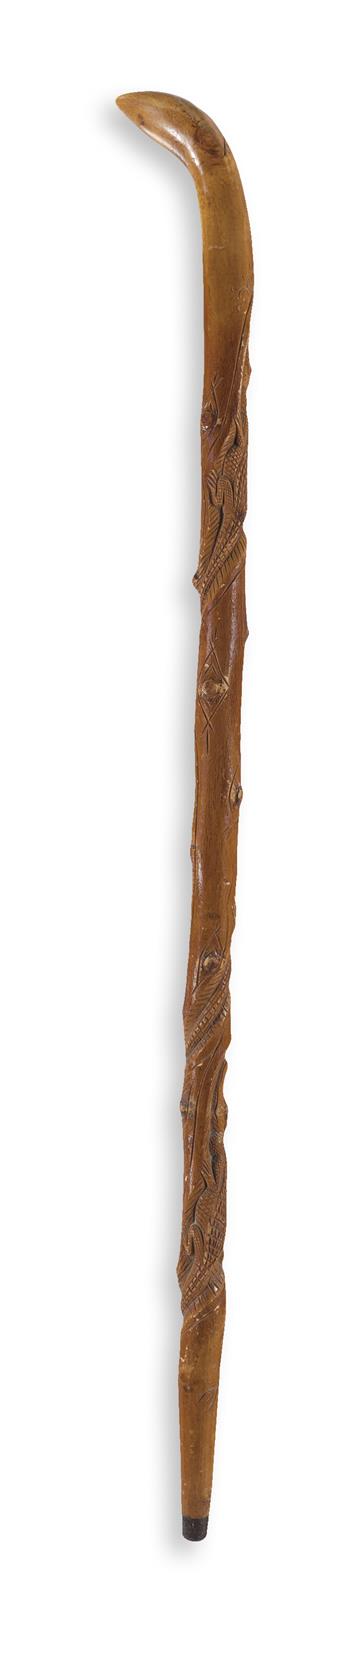 (SLAVERY AND ABOLITION.) Cane said to have been a gift from Frederick Douglass to John Brown.